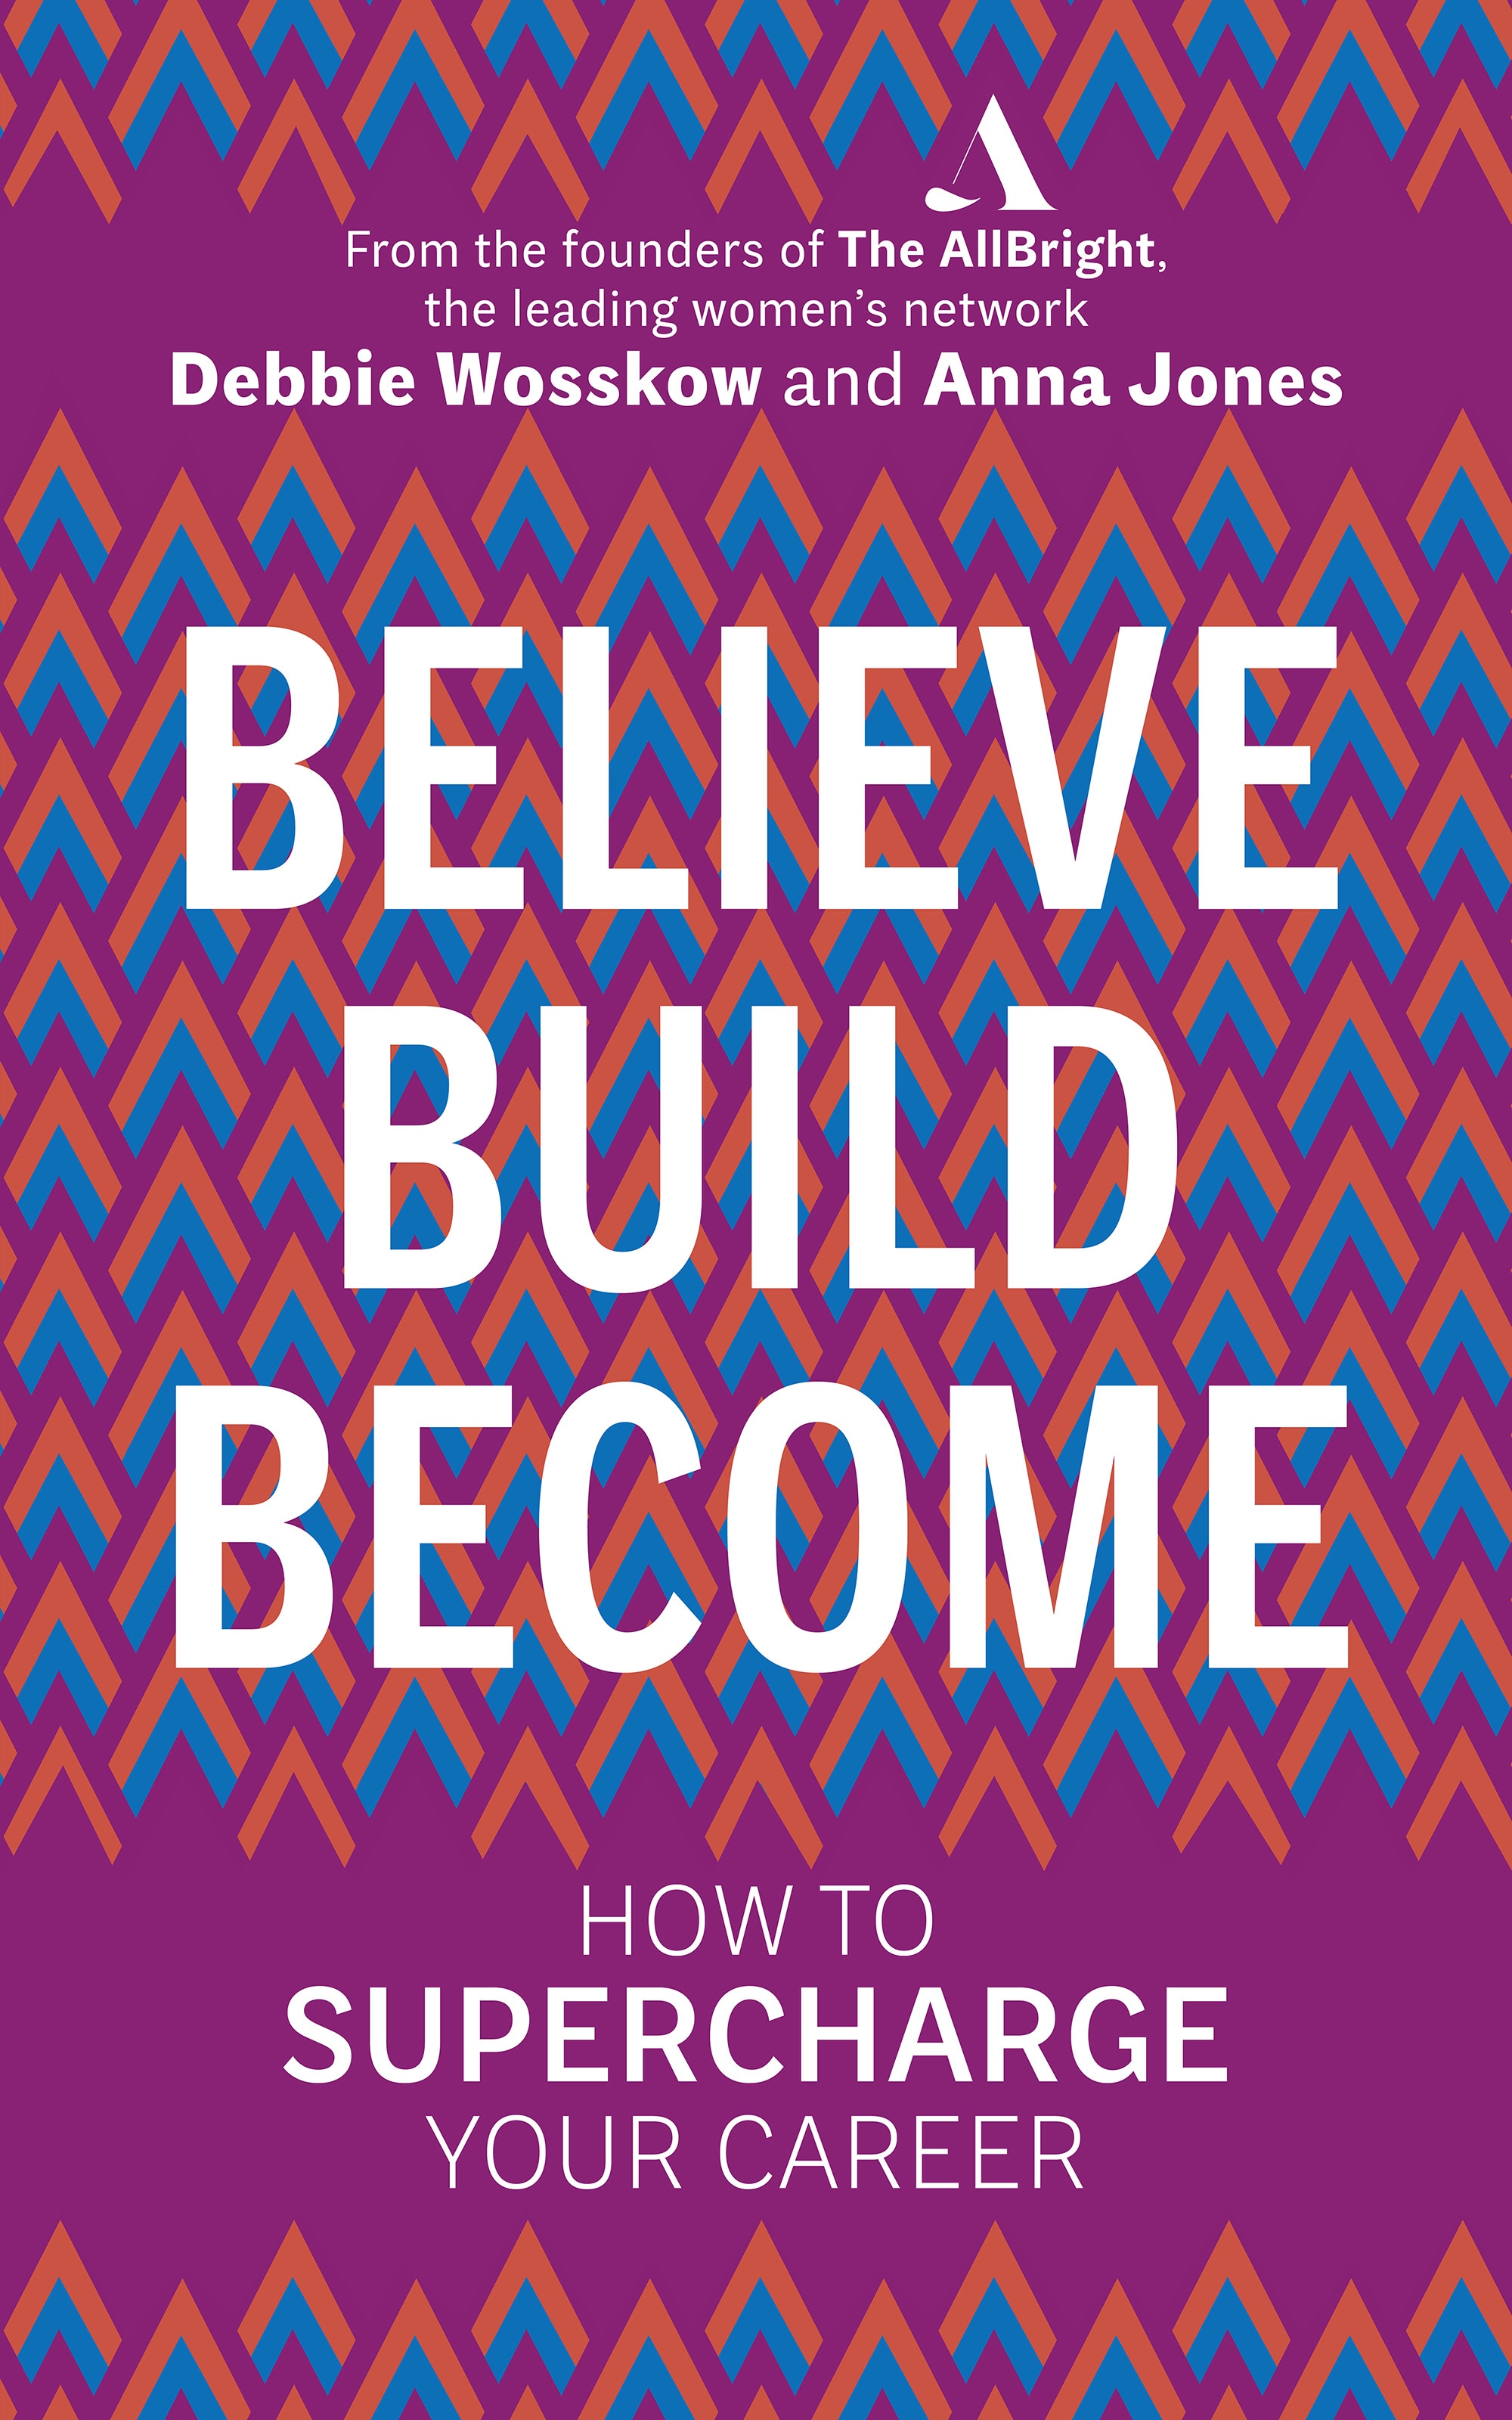 Book “Believe. Build. Become.” by Debbie Wosskow, Anna Jones — May 9, 2019